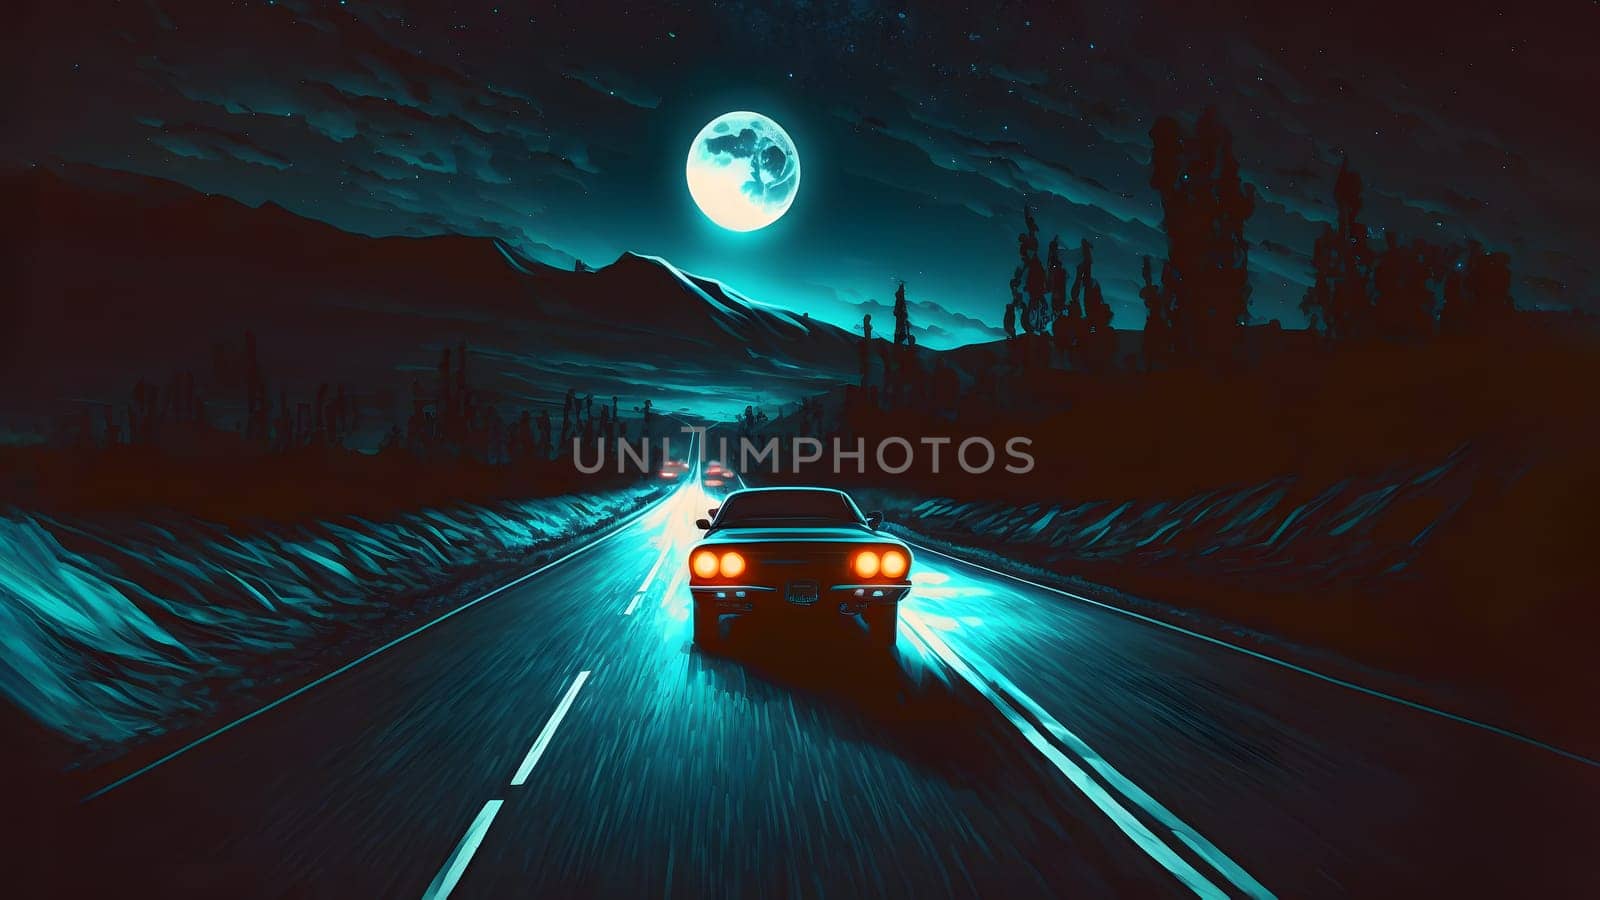 alone car on full moon night road in wilderness with forest on sides and mountains on the horizon, neural network generated art. Digitally generated image. Not based on any actual scene or pattern.